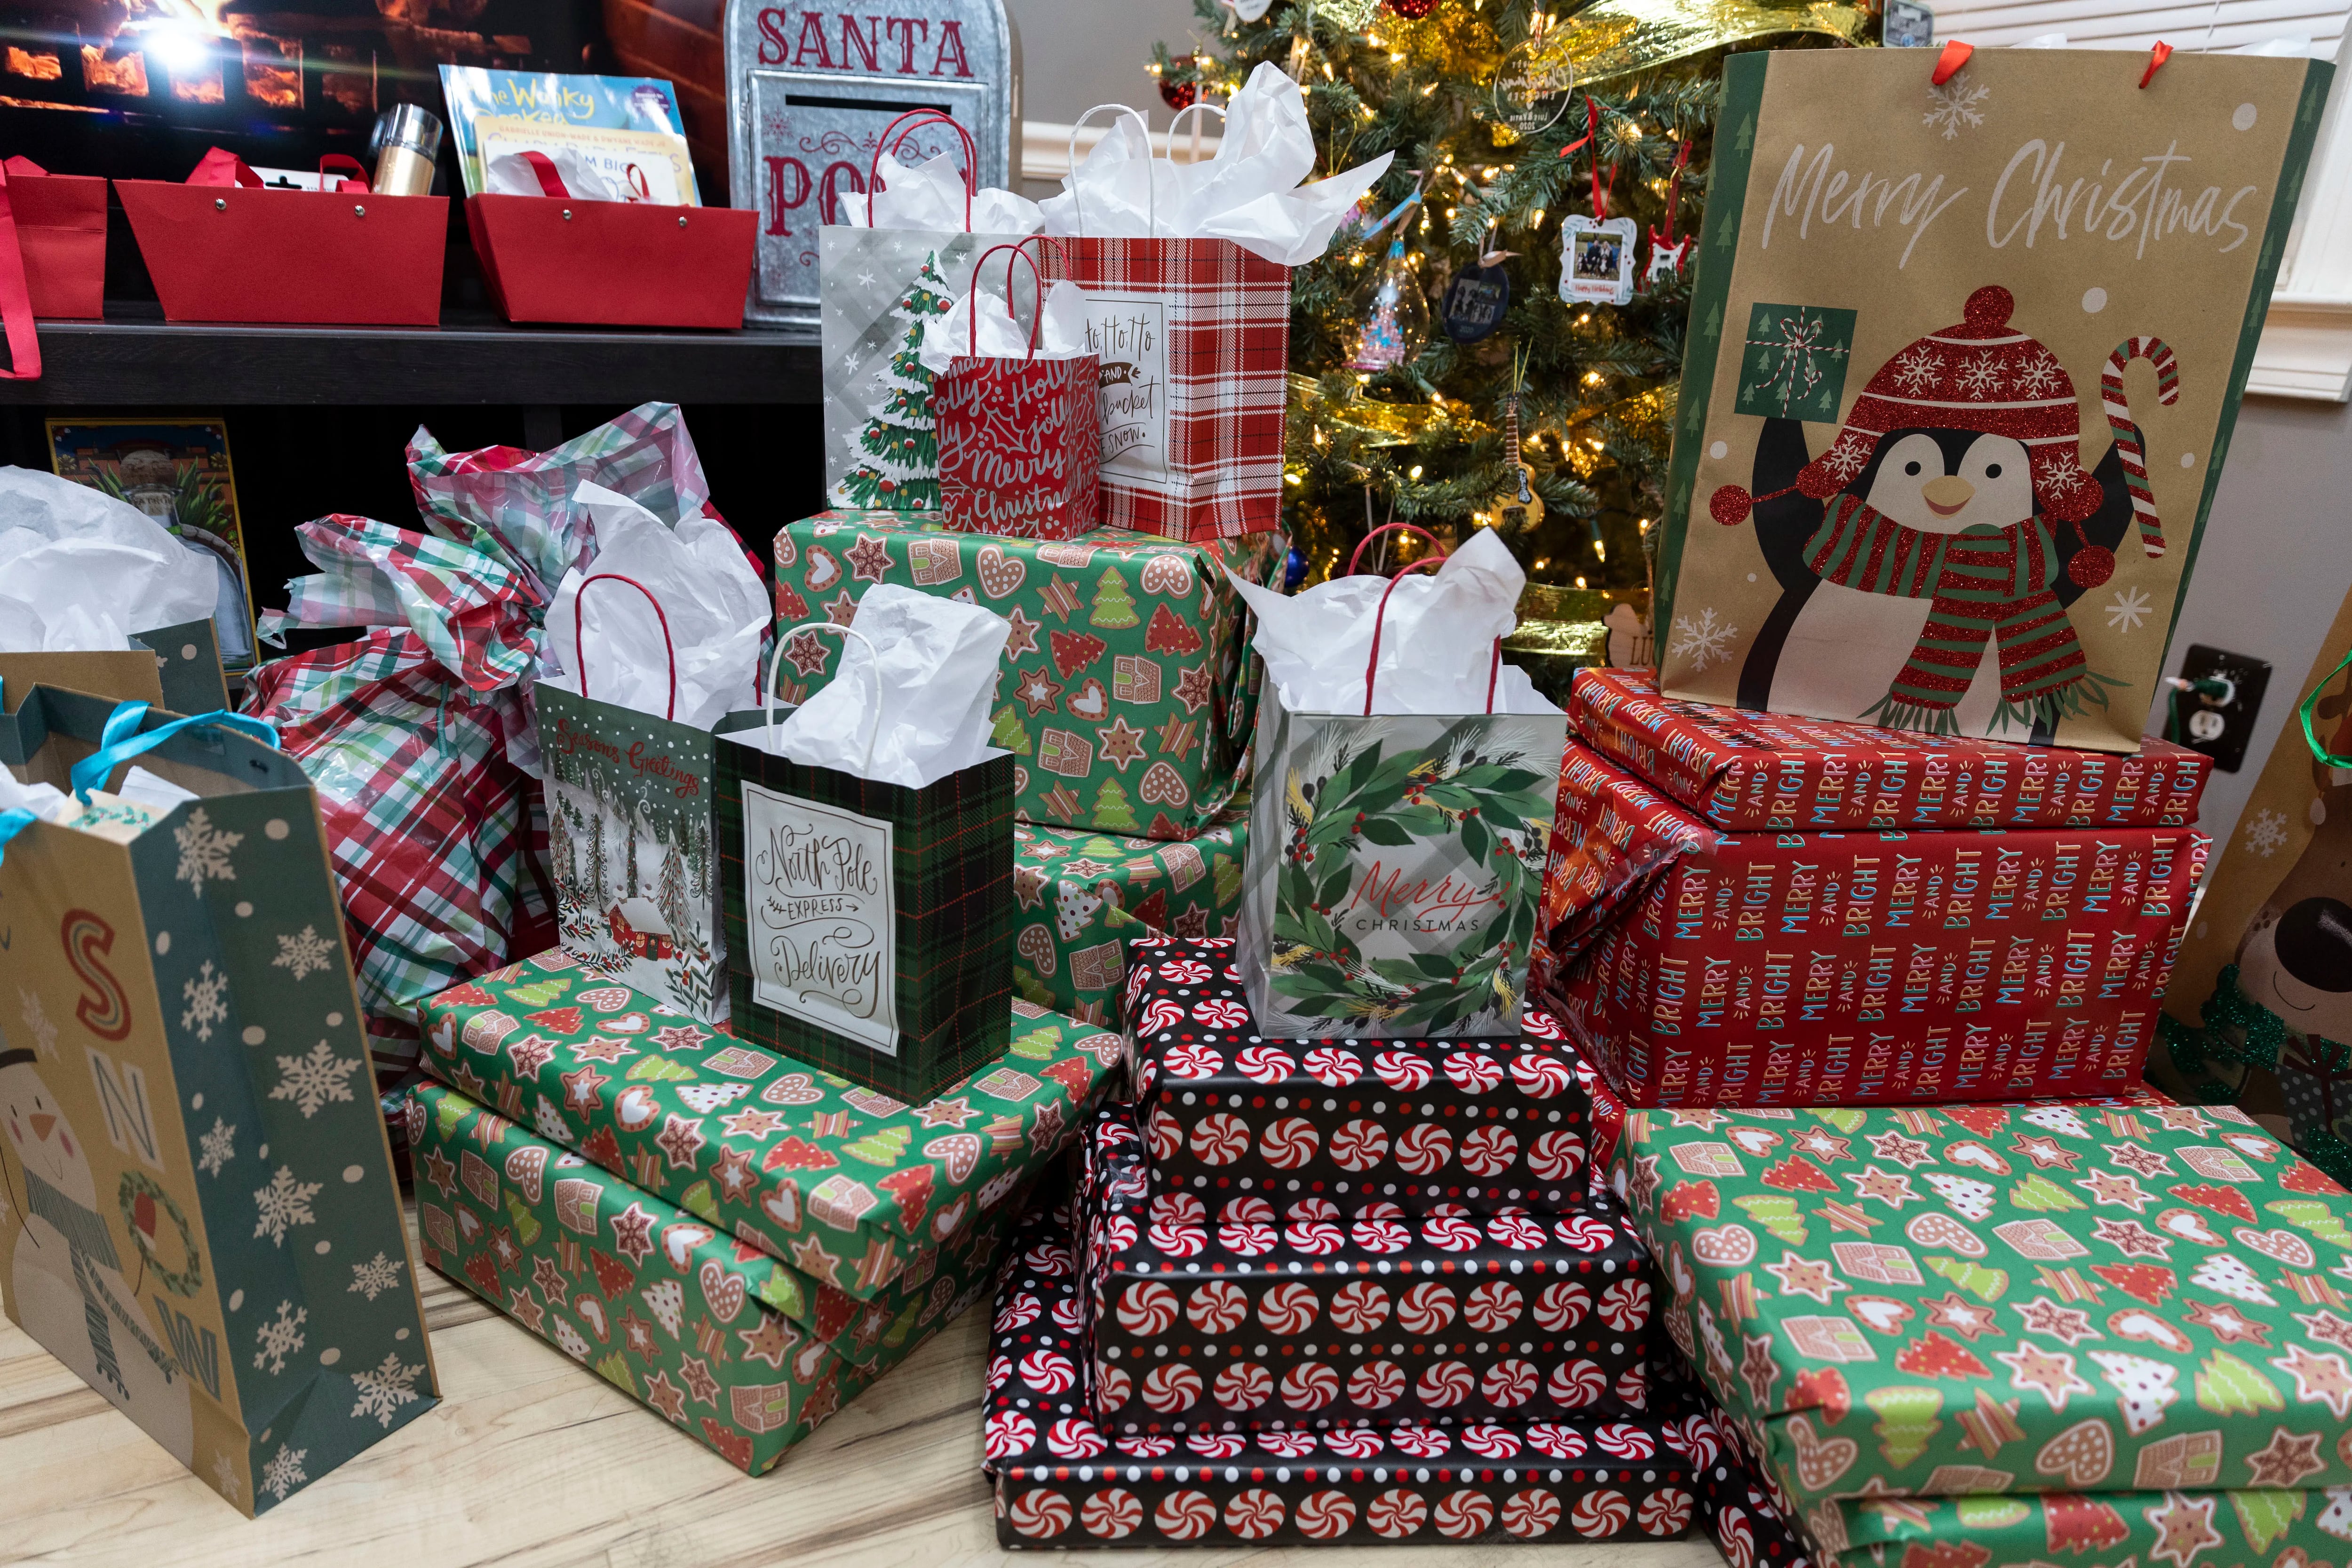 Wrapped presents were under the Christmas tree at the Garcia home in Bellmawr, N.J., on Monday, Nov. 27, 2023. They finish their holiday shopping by Labor Day. Experts say putting aside money months in advance can help you spend less come the holiday season.